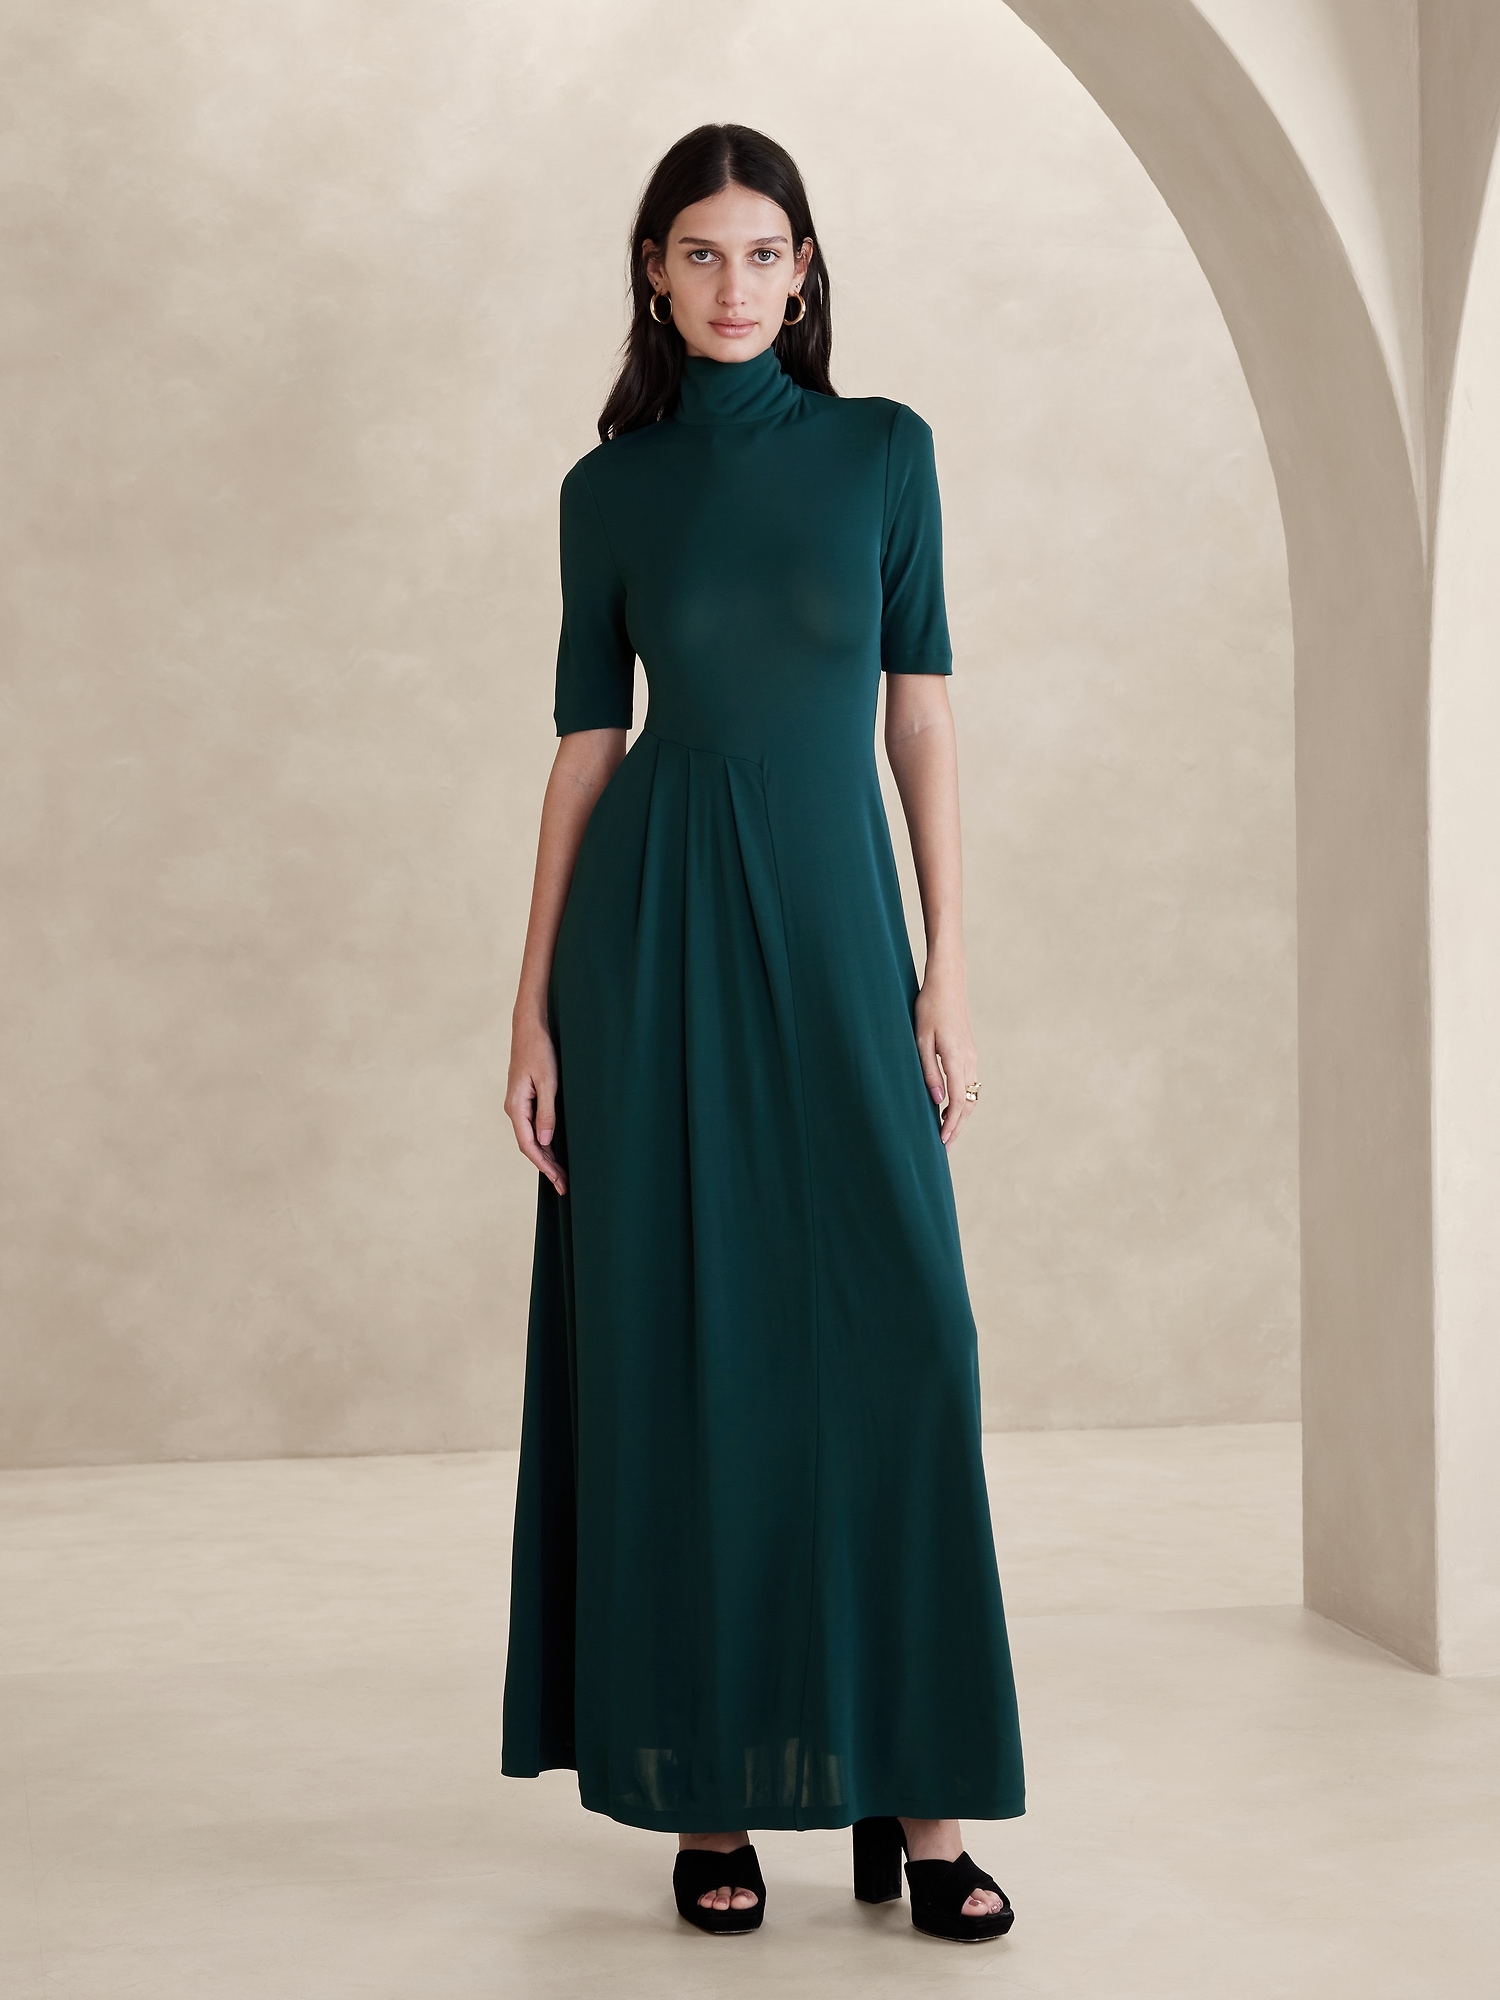 Women's Long Sleeve Formal Dresses & Evening Gowns | Nordstrom